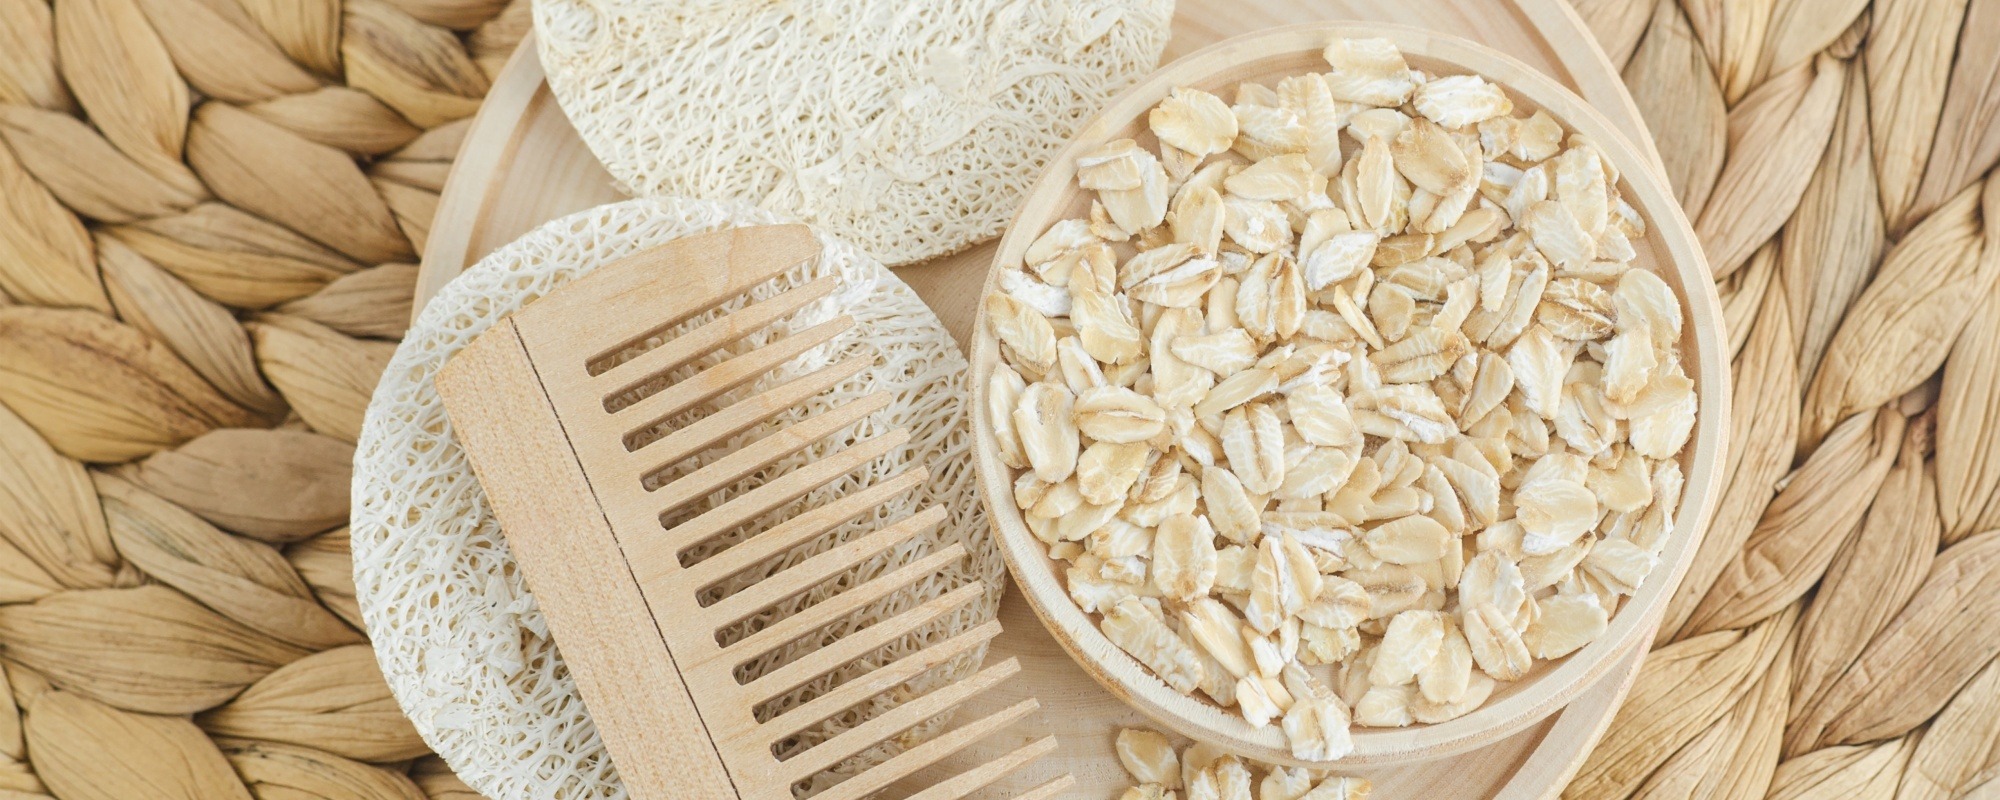 Oat Oil What Are Its Benefits And How Should You Use It In Your Hair   Vinci Hair Clinic